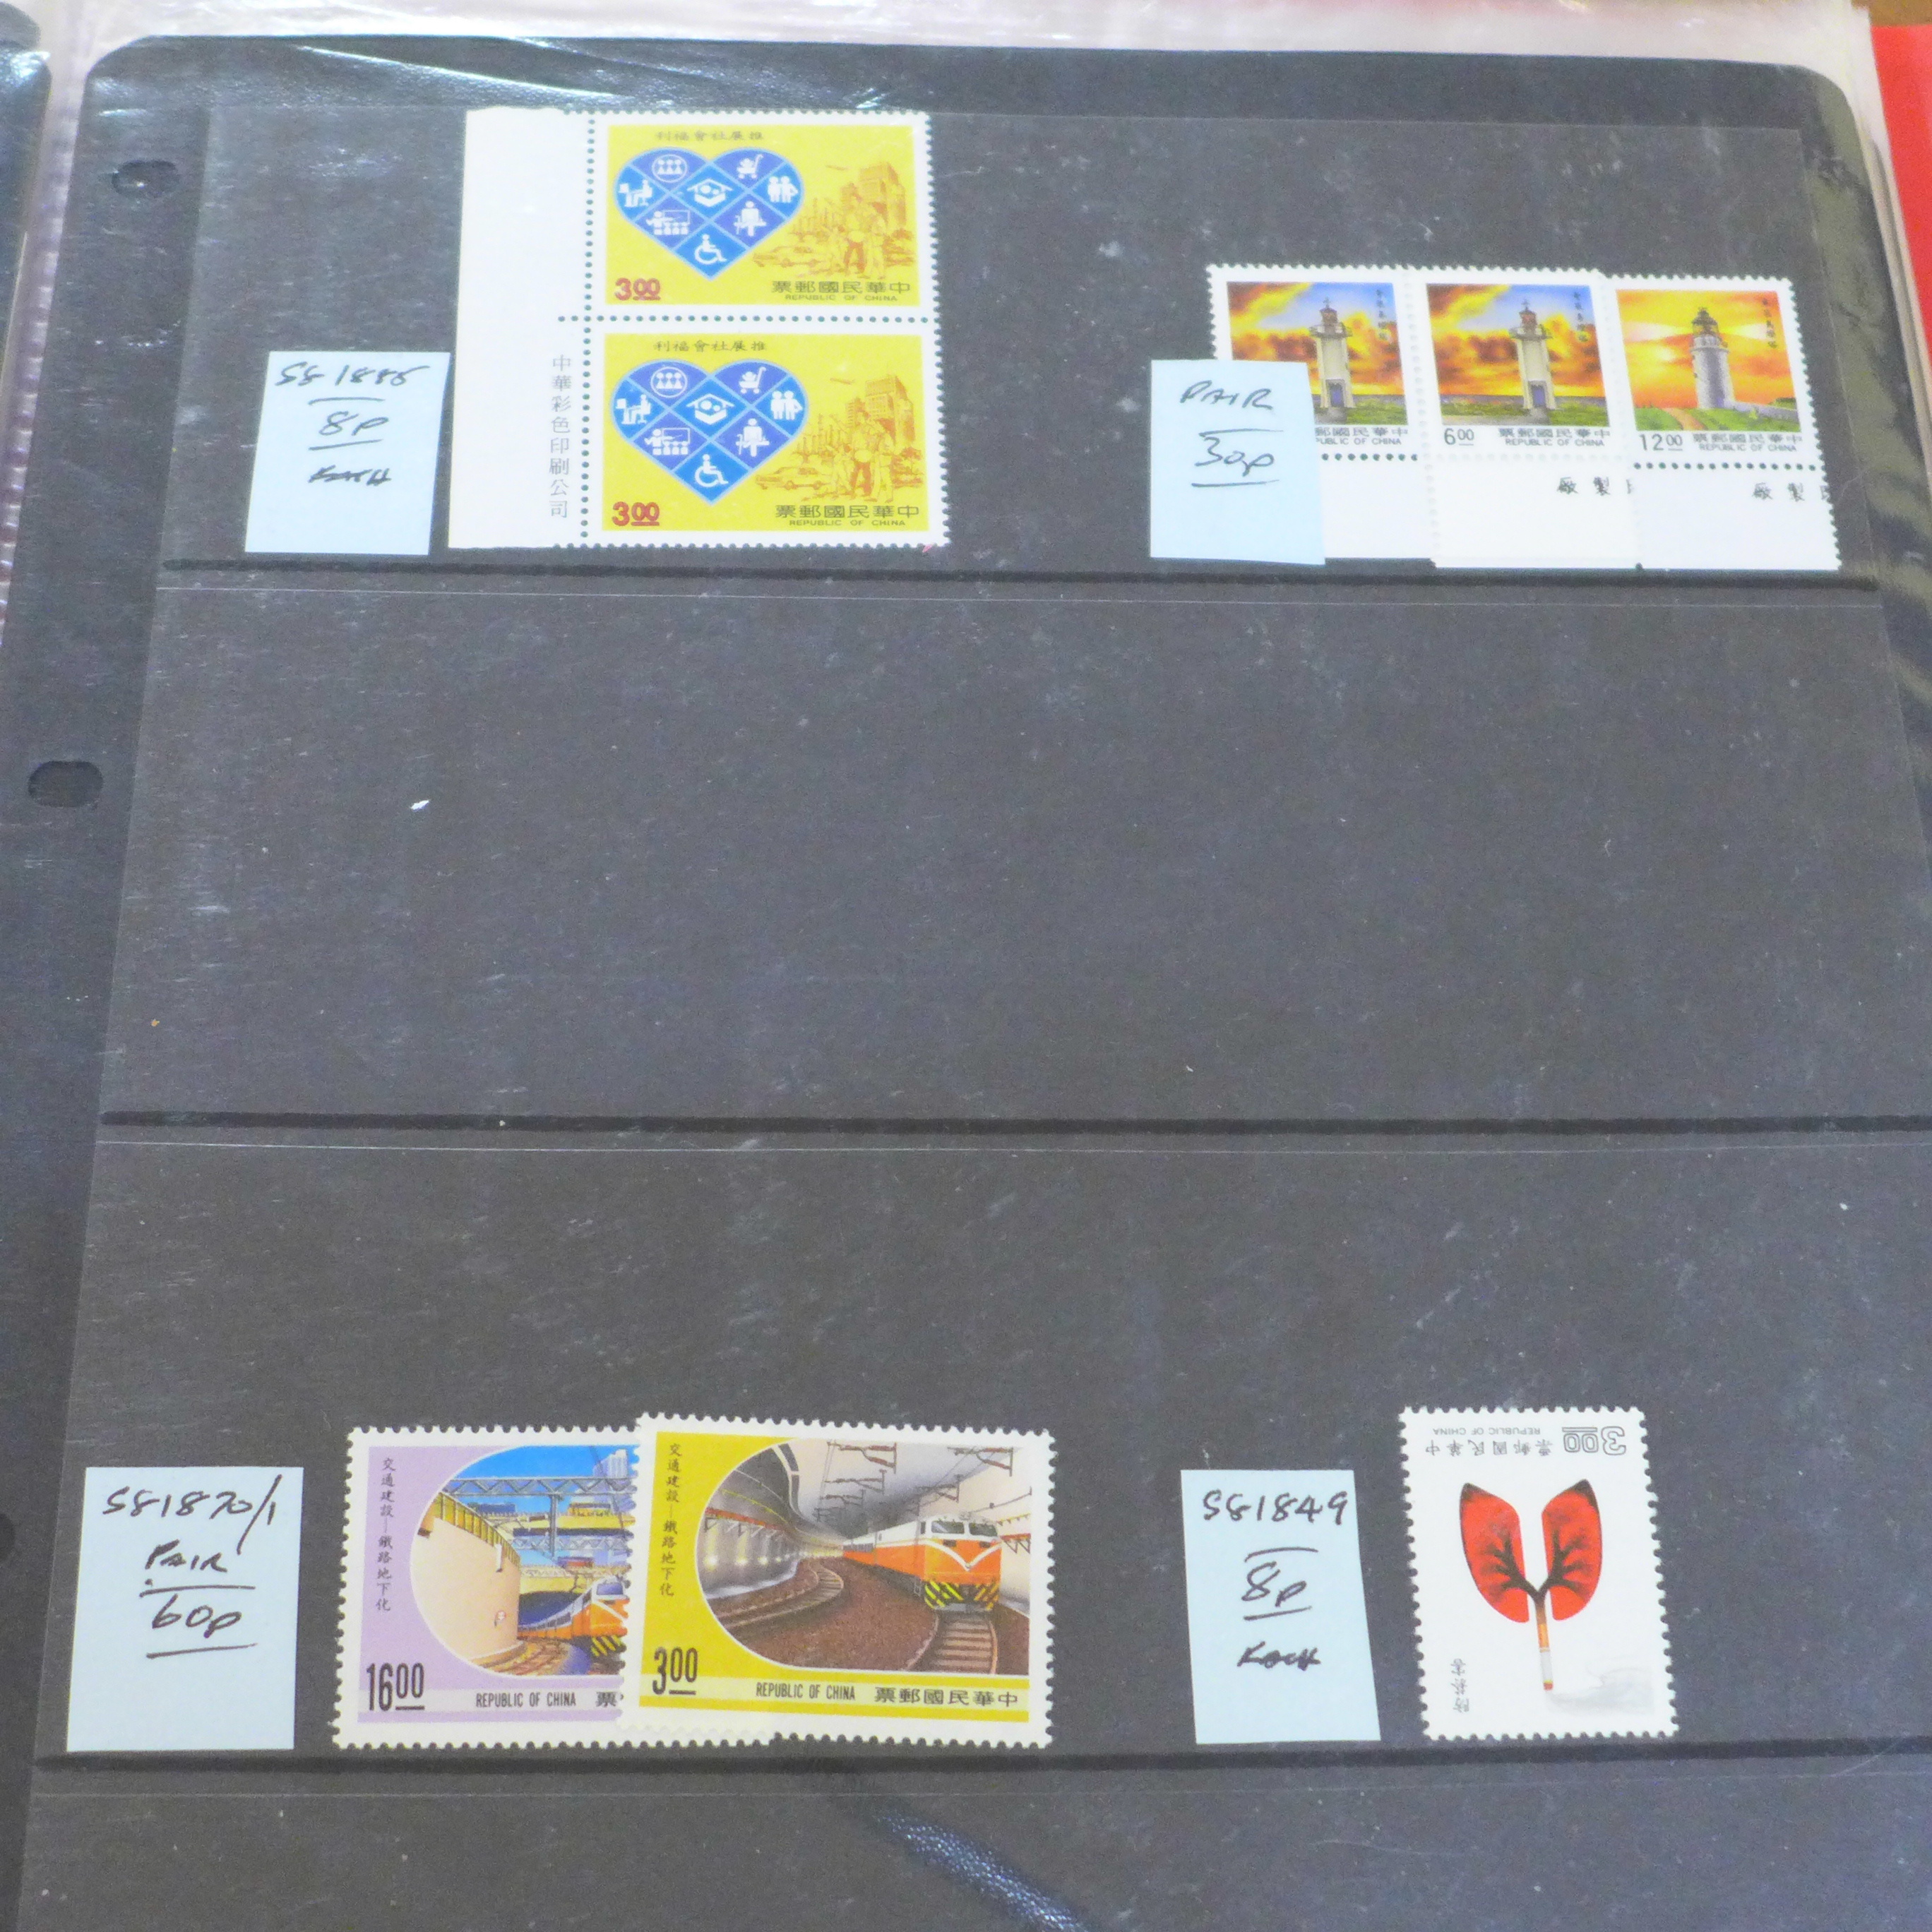 Chinese stamps, First Day covers, postal stationery etc. - Image 7 of 10